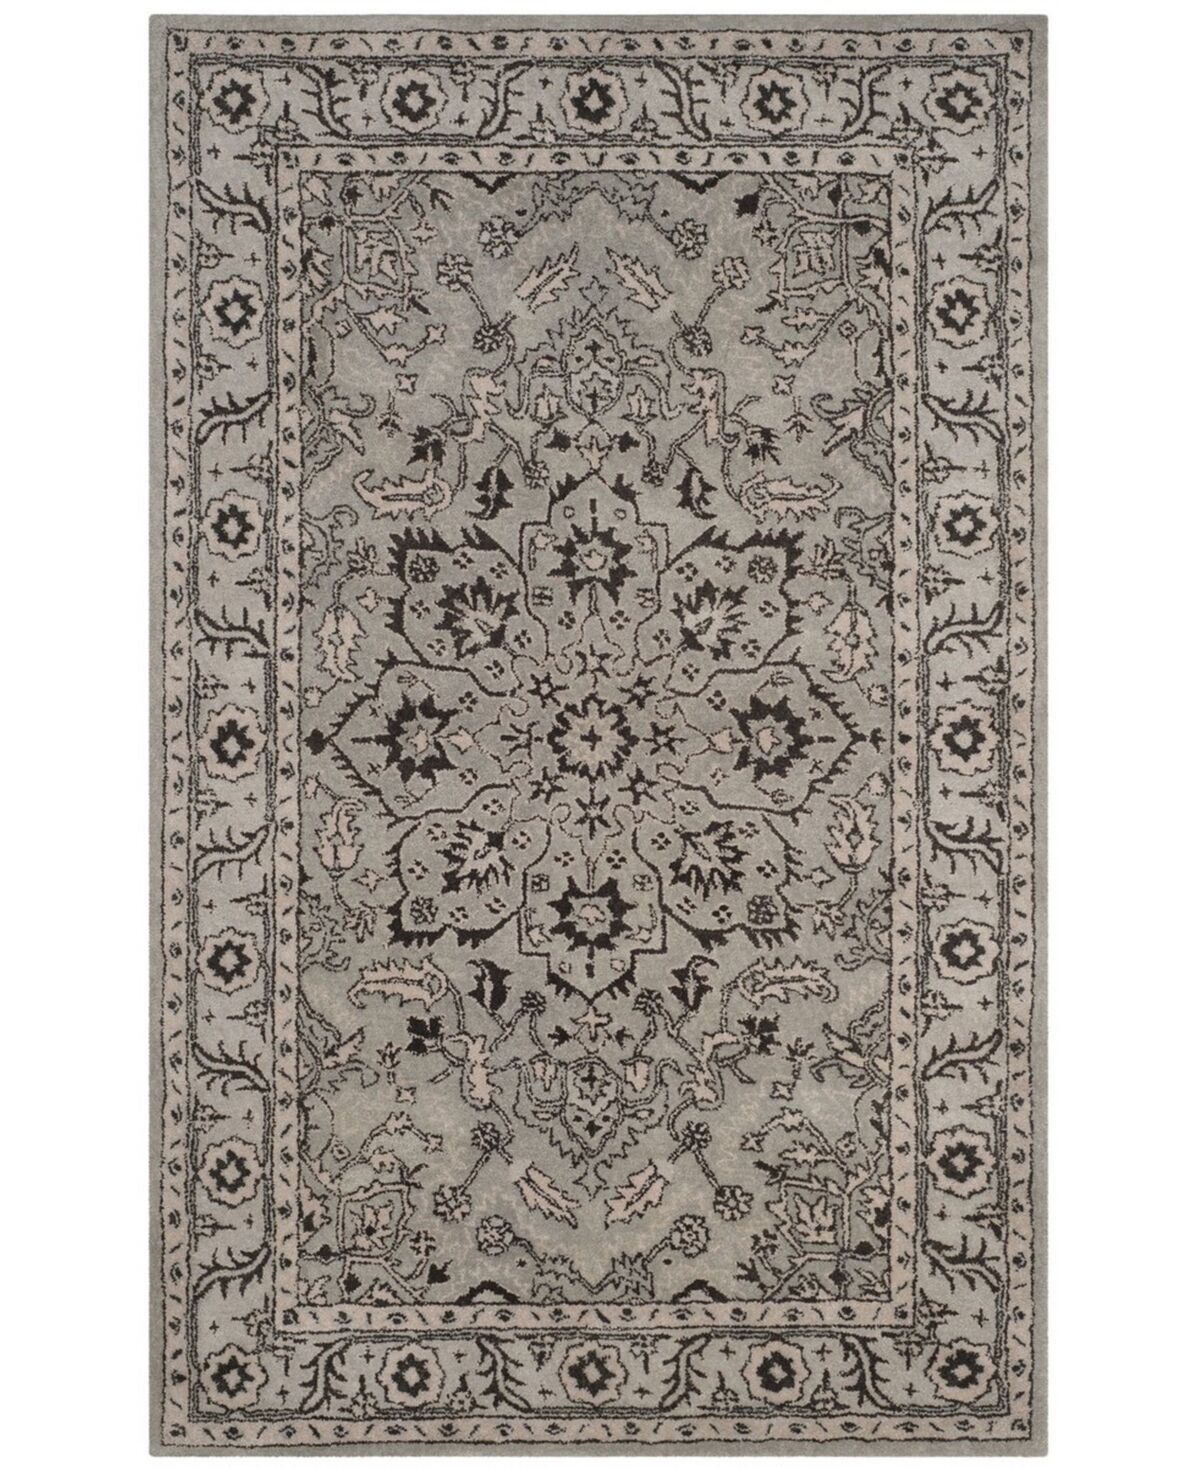 Safavieh Antiquity At58 Gray and Beige 5' x 8' Area Rug - Gray